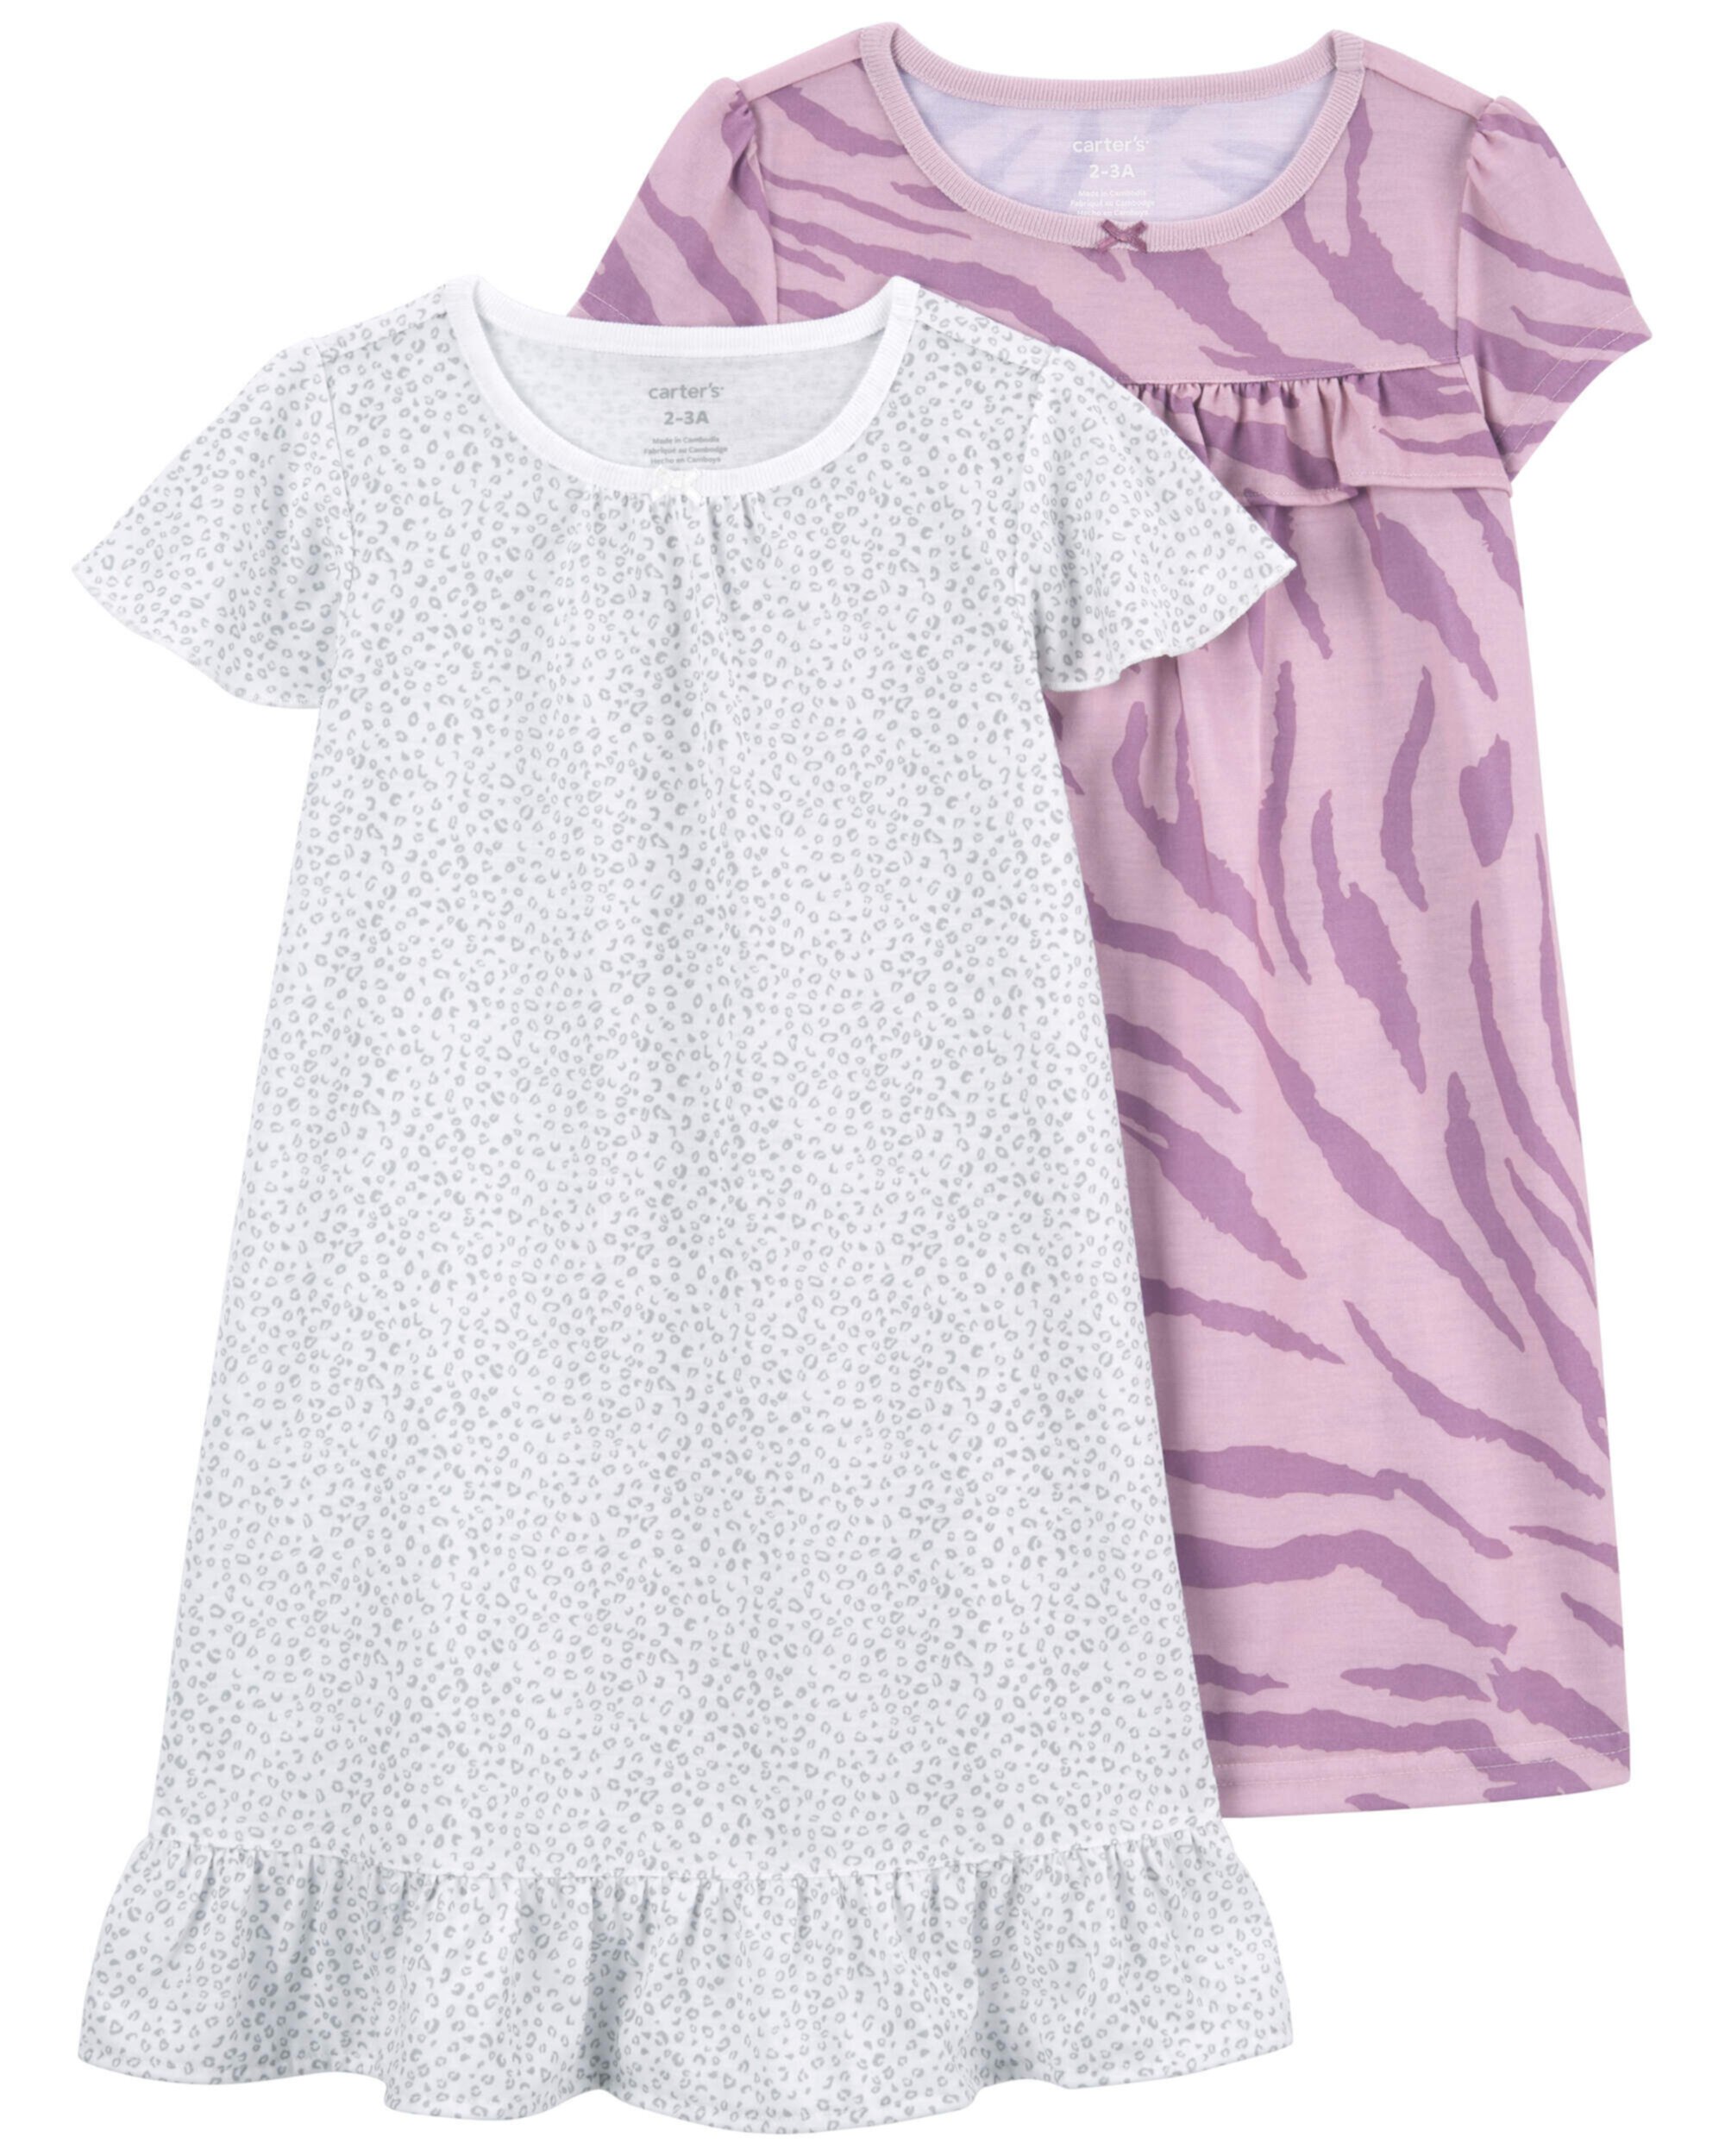 Toddler 2-Pack Nightgowns Carter's